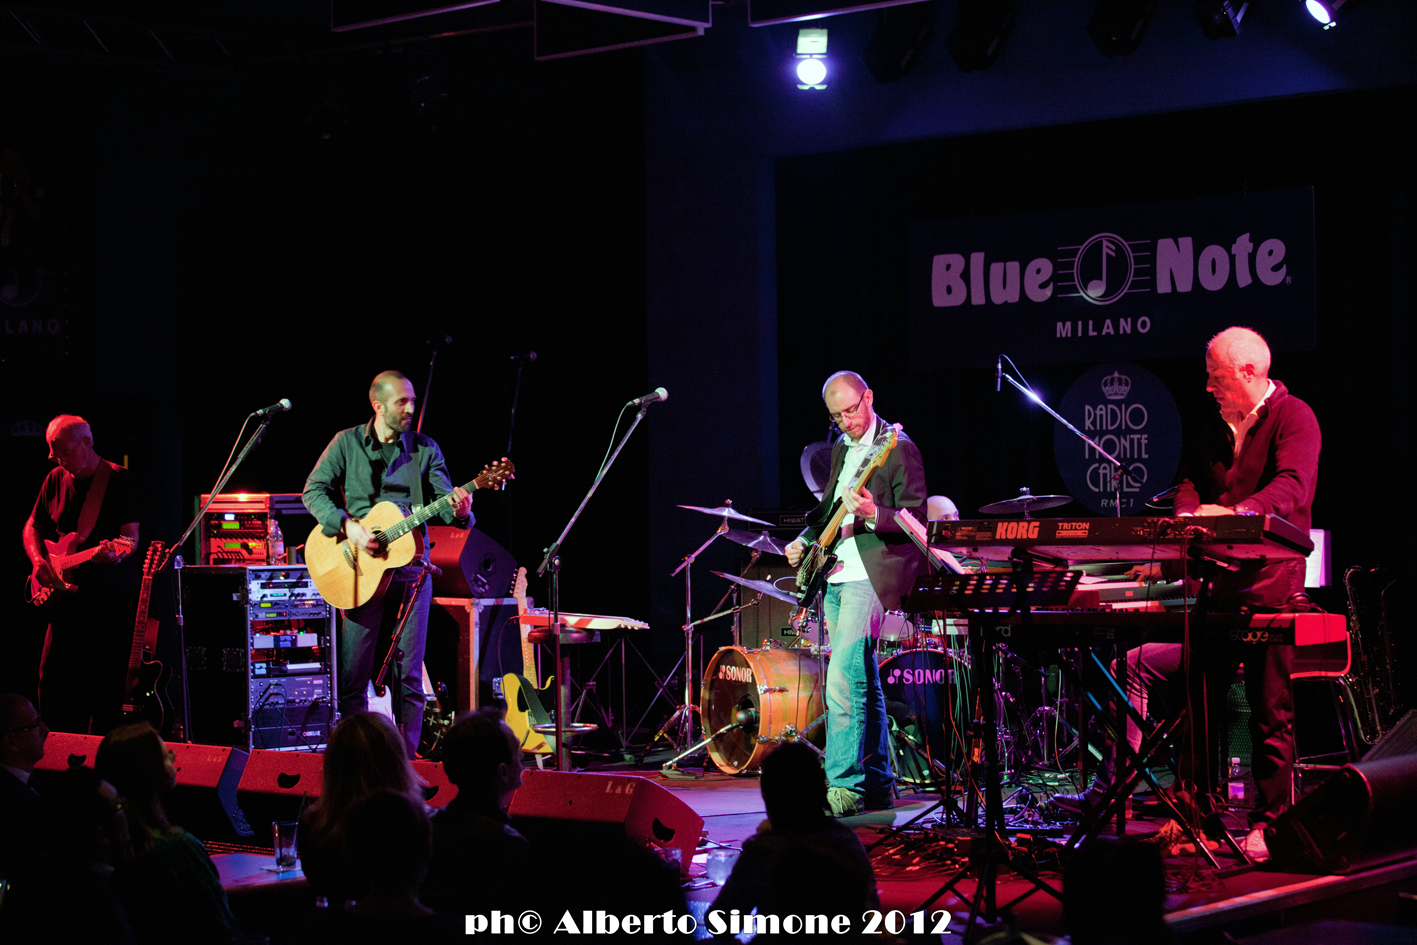 Big One 2012 – The Best of Pink Floyd (Part 1) 18/09/2012 21.01